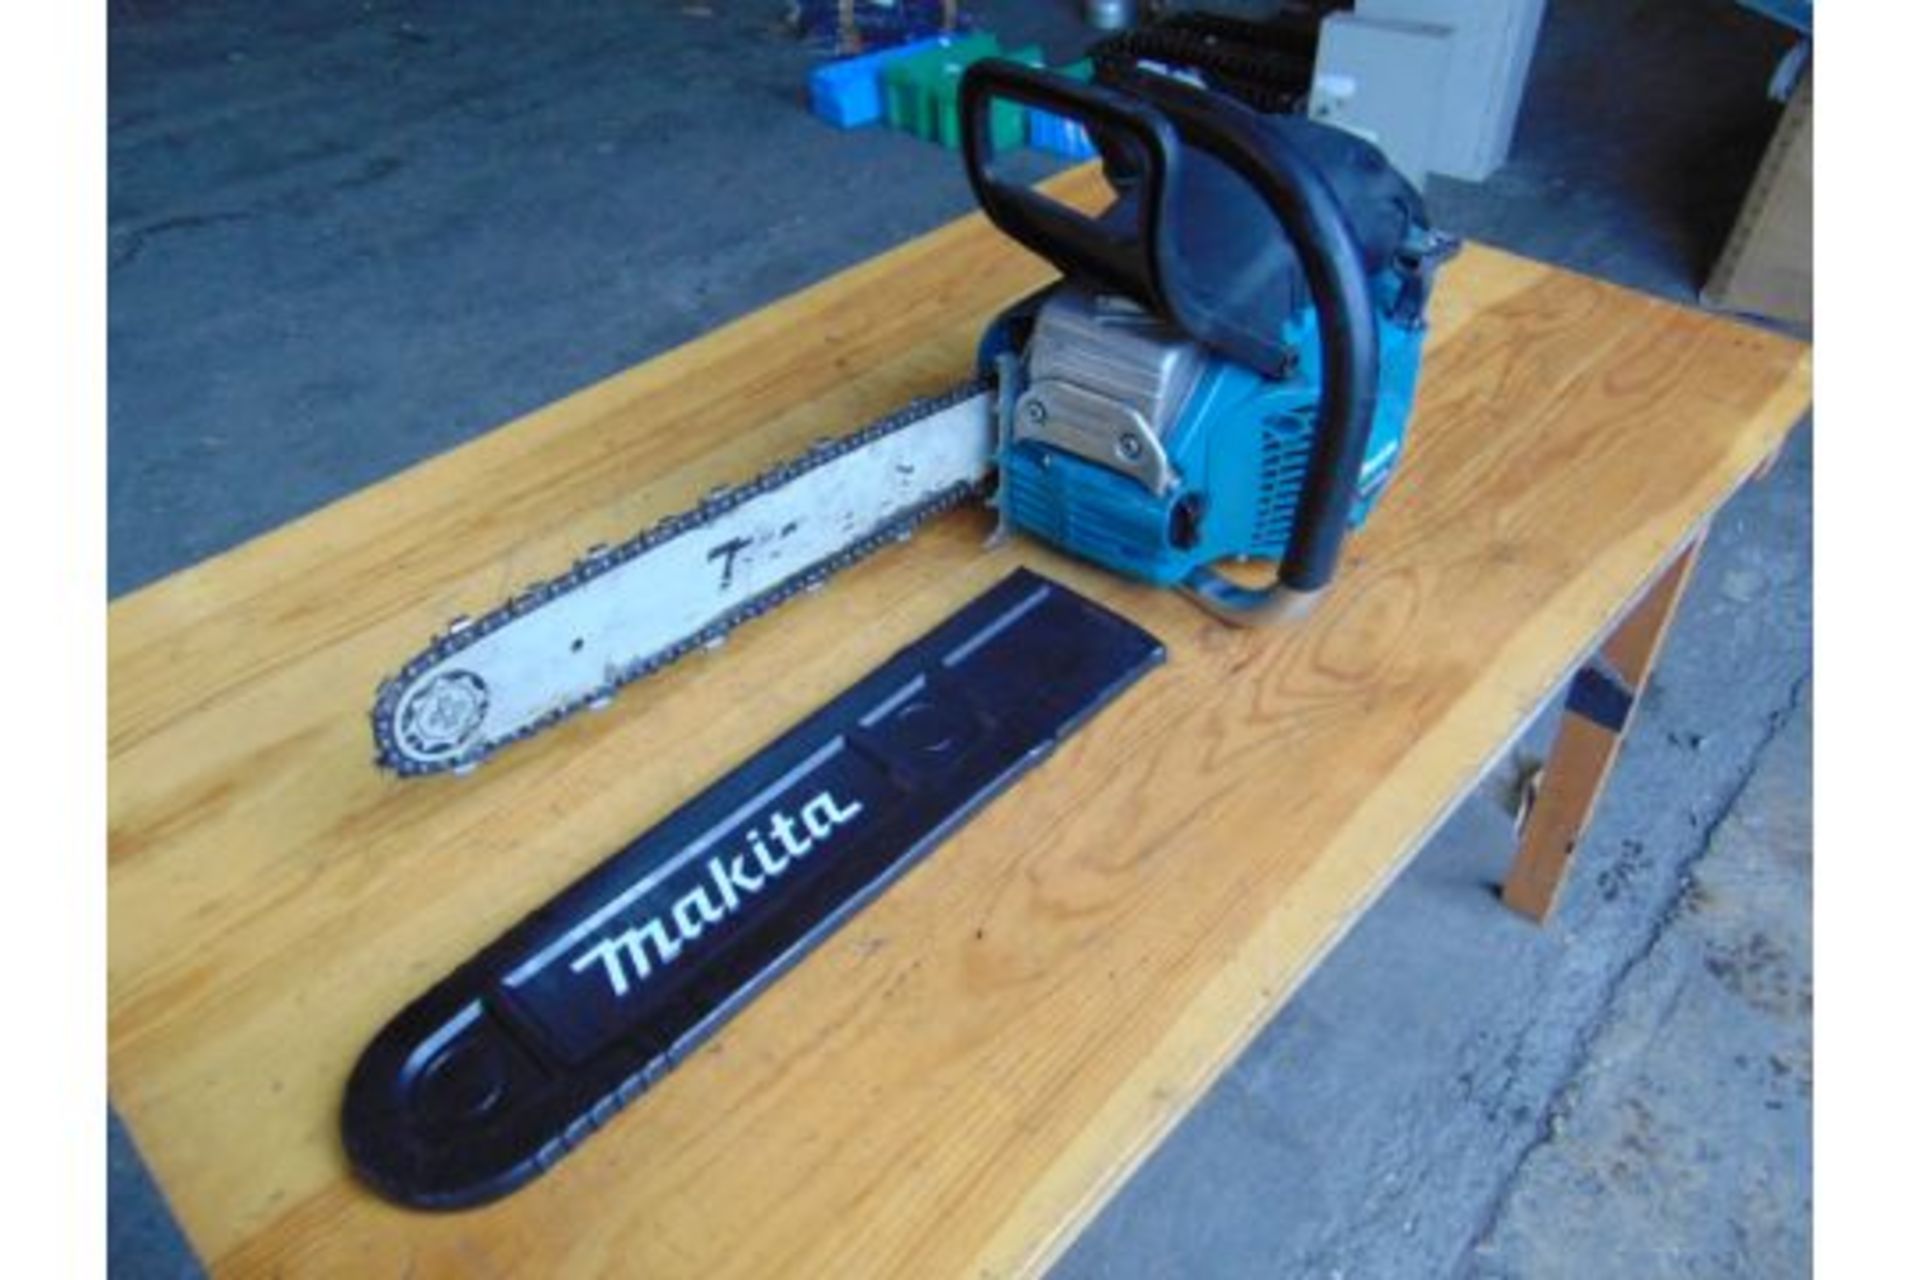 Makita DCS 5030 50CC Chainsaw c/w Chain Guard from MoD. - Image 2 of 5